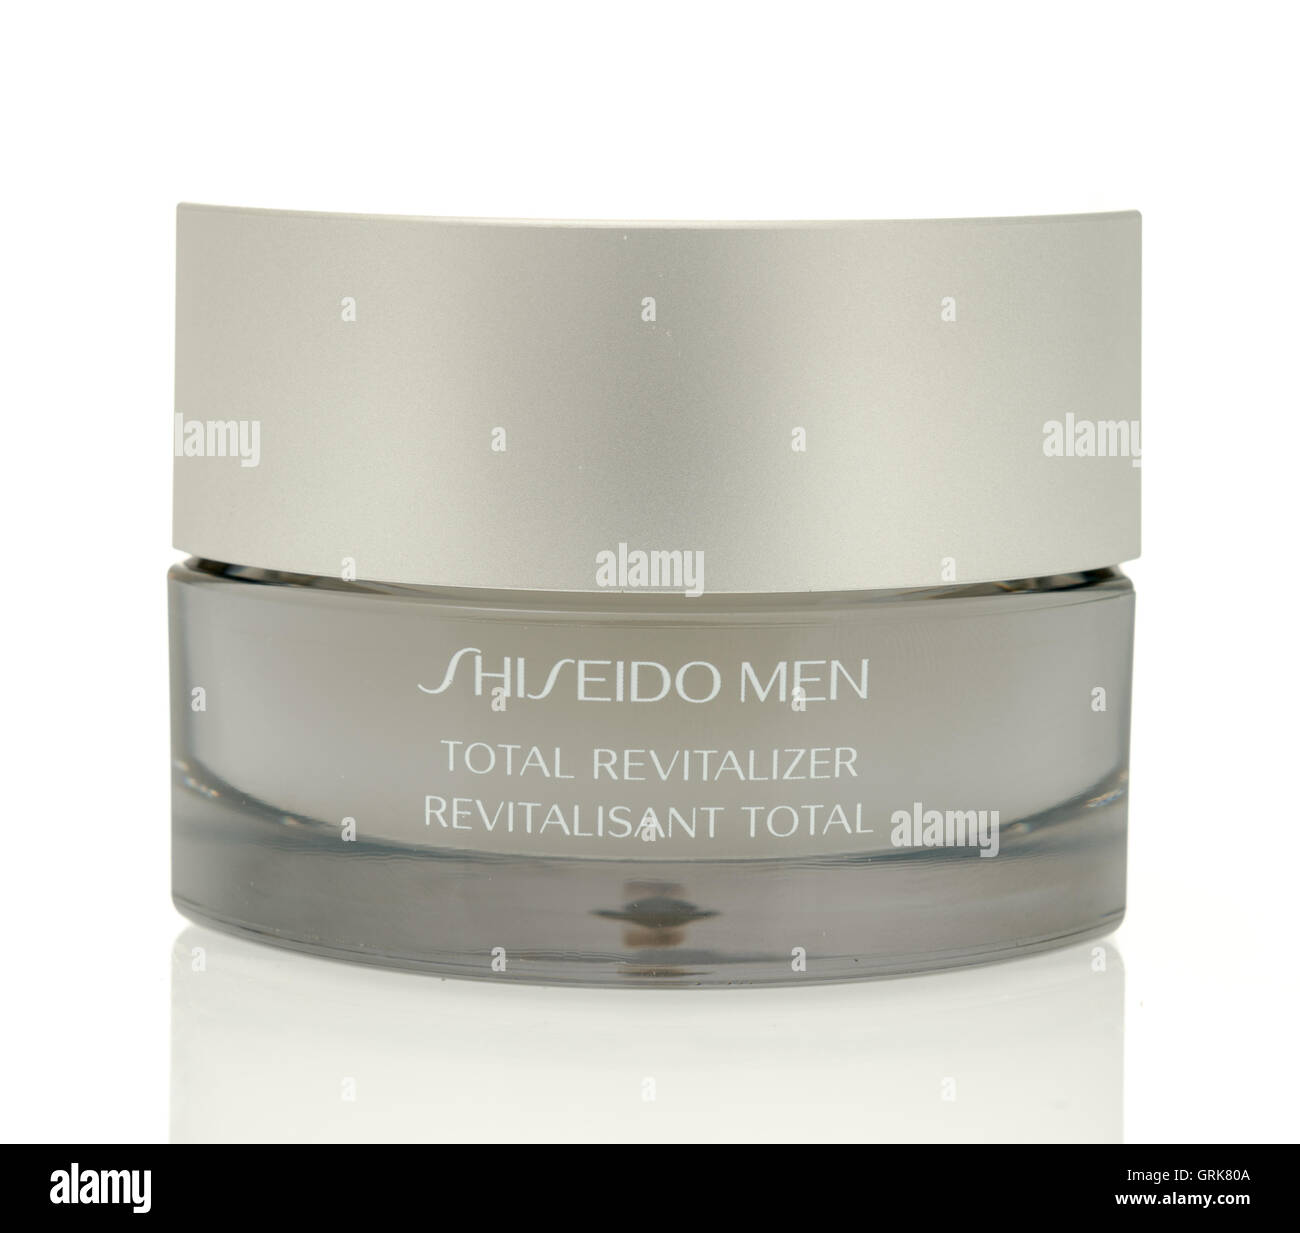 Winneconne, WI - 4 August 2016: Shiseido men total revitalizer face cream on an isolated background. Stock Photo